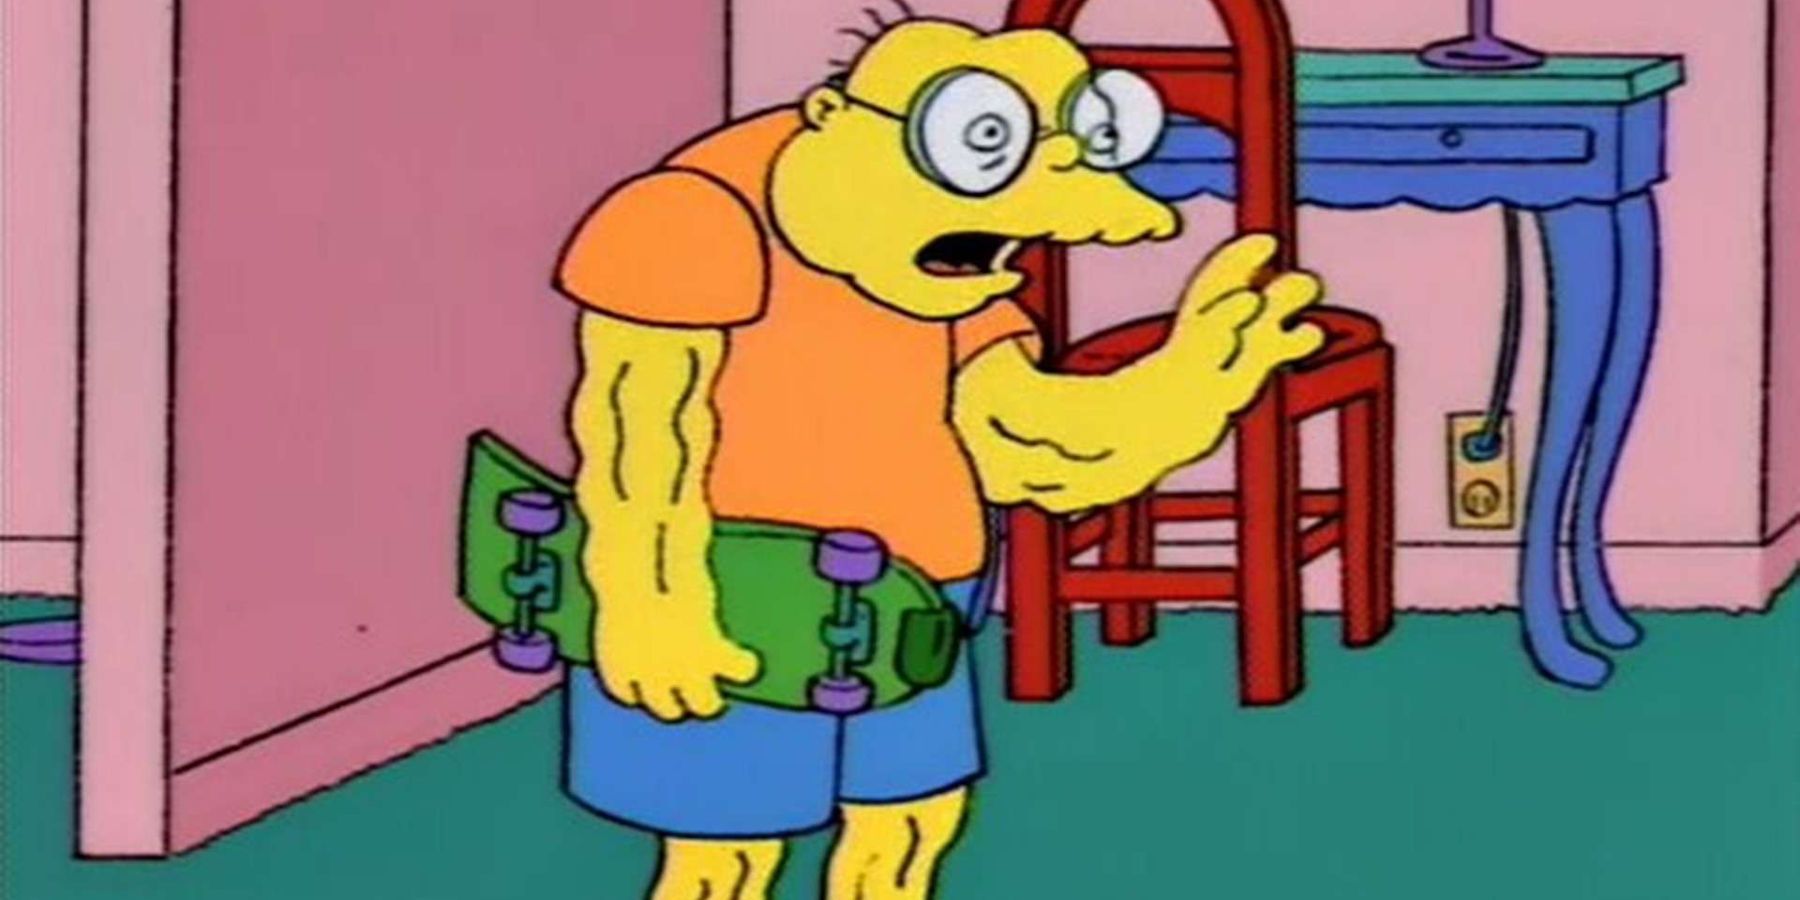 The Simpsons - Hans Moleman dressed as Bart